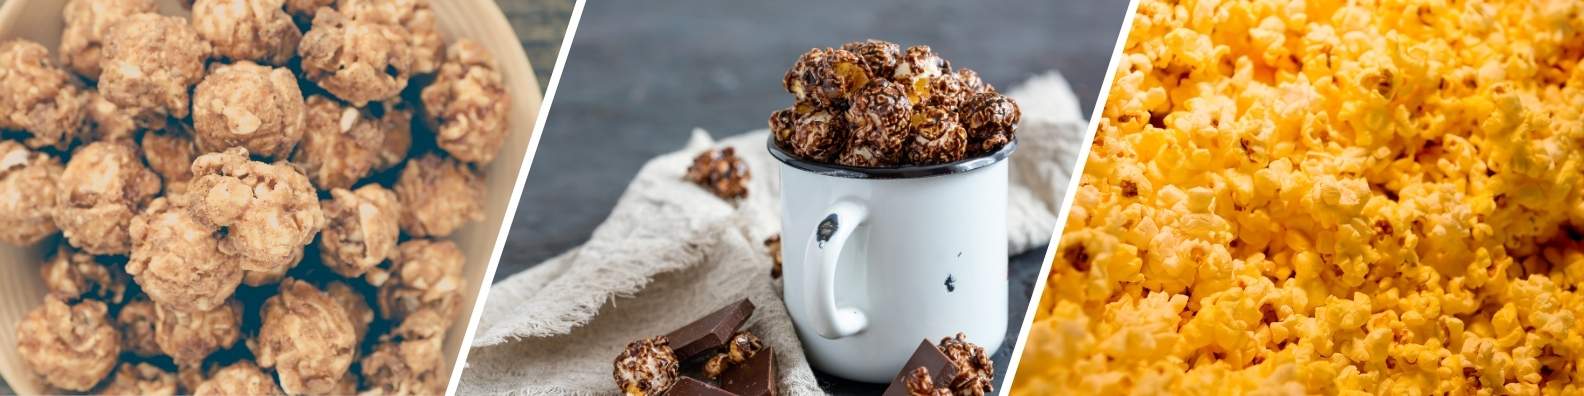 Healthy Popcorn Recipes: 12 Simple Ways to Add Flavour